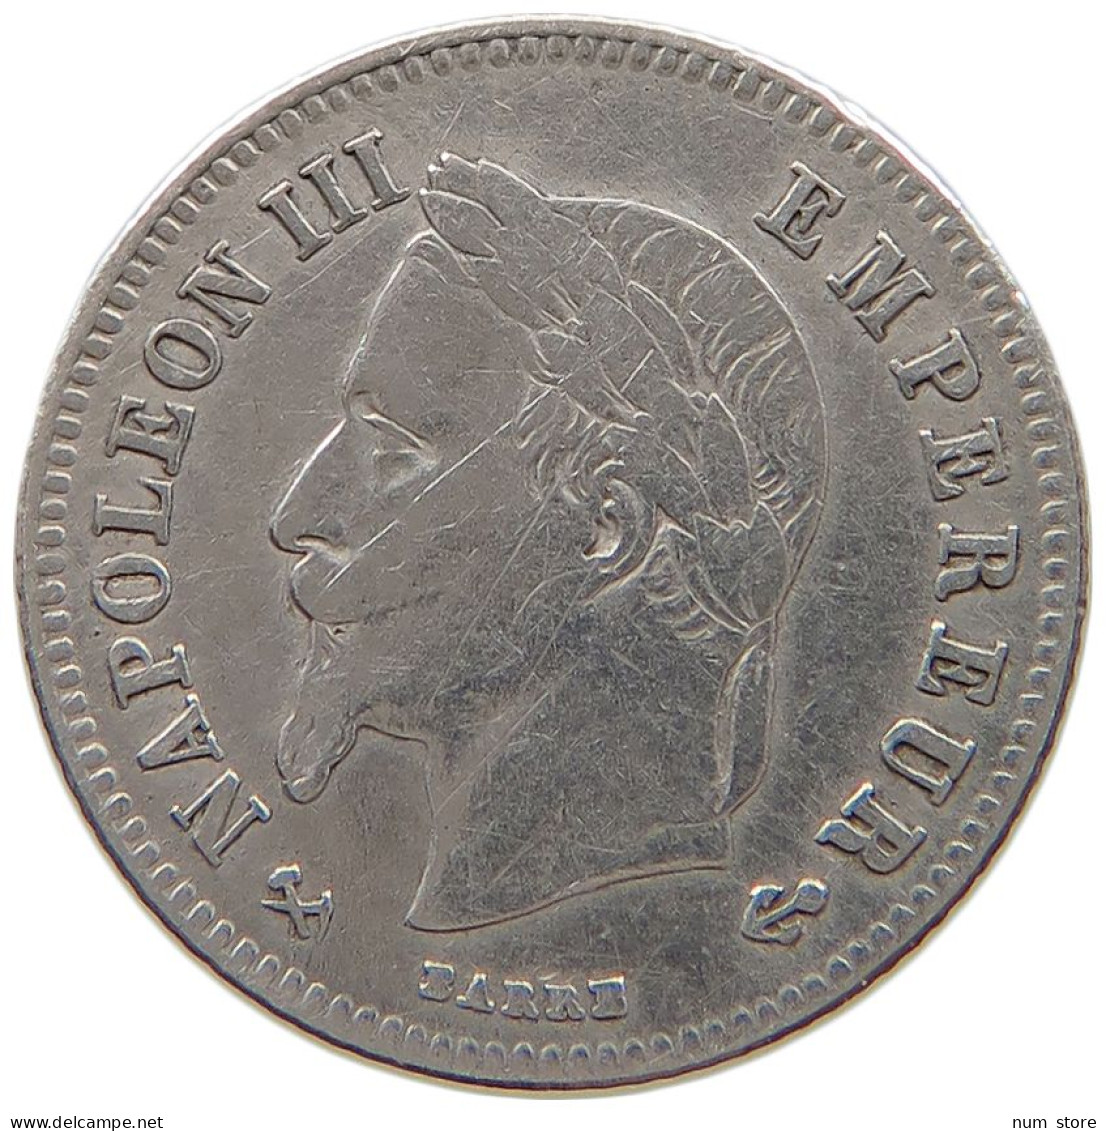 FRANCE 20 CENTIMES 1866 K Napoleon III. (1852-1870) #t157 0751 - 20 Centimes